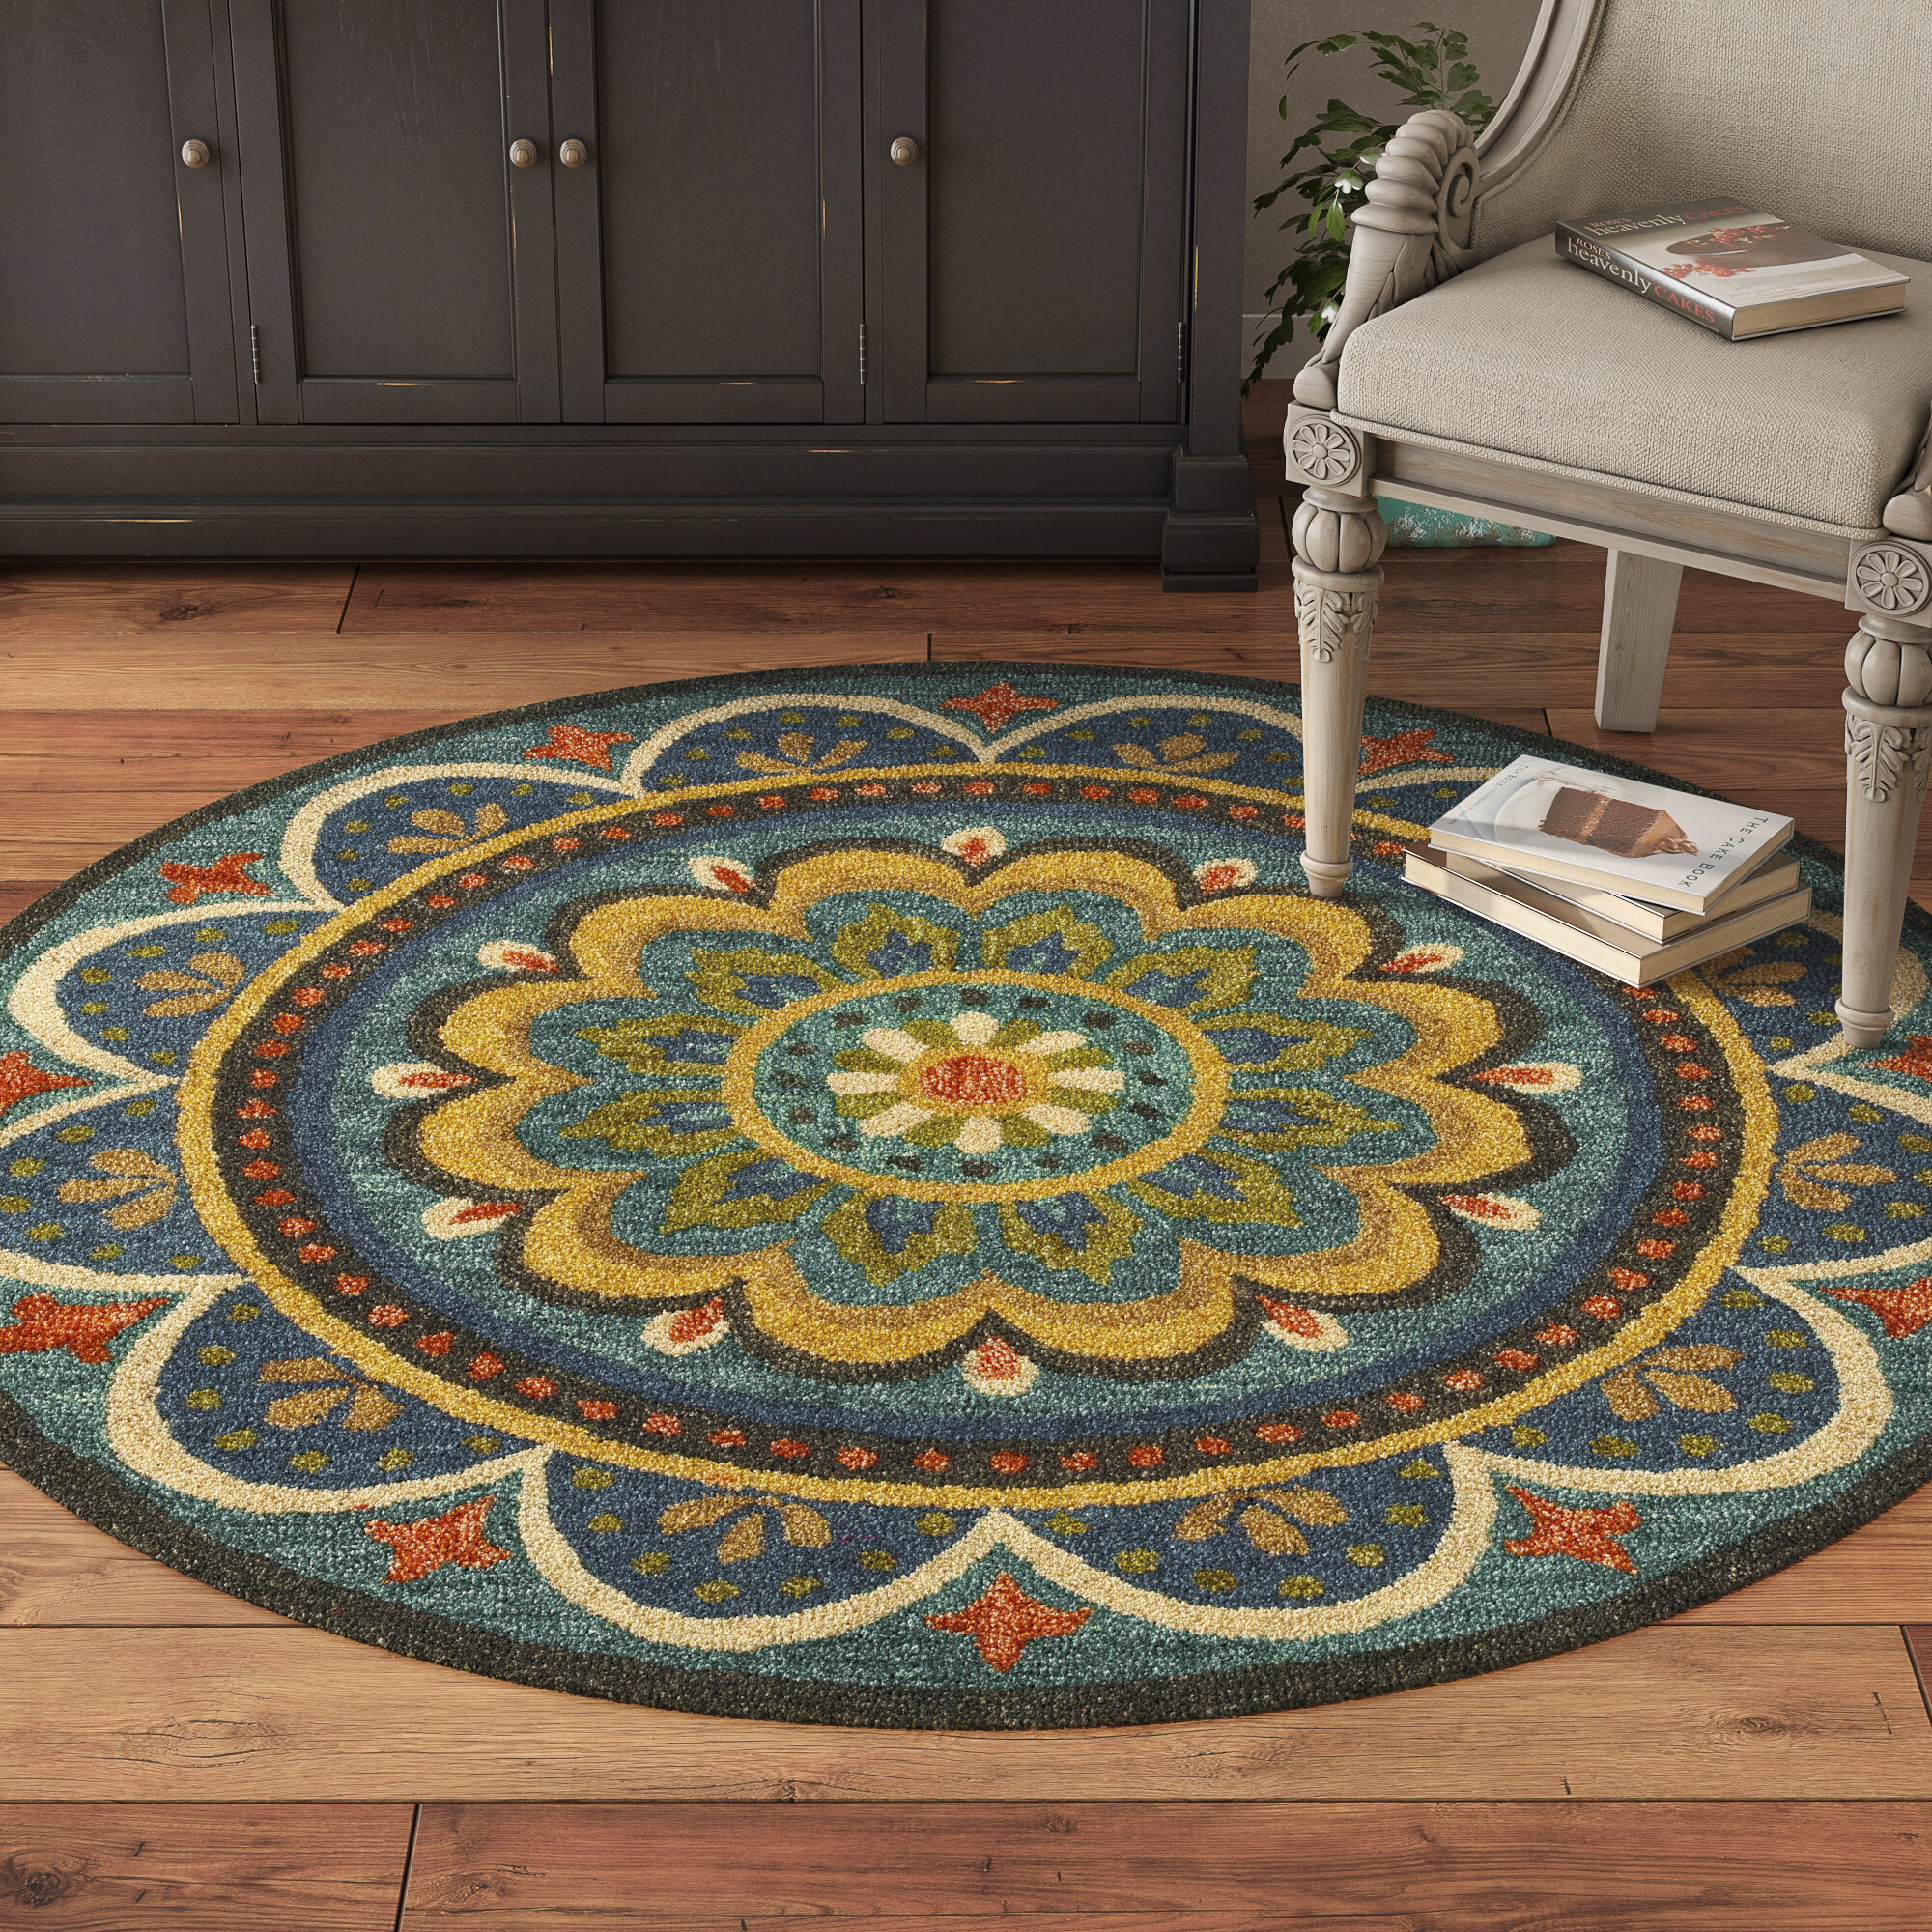 Round Owensboro Oriental Handmade Tufted Wool Area Rug in Turquoise